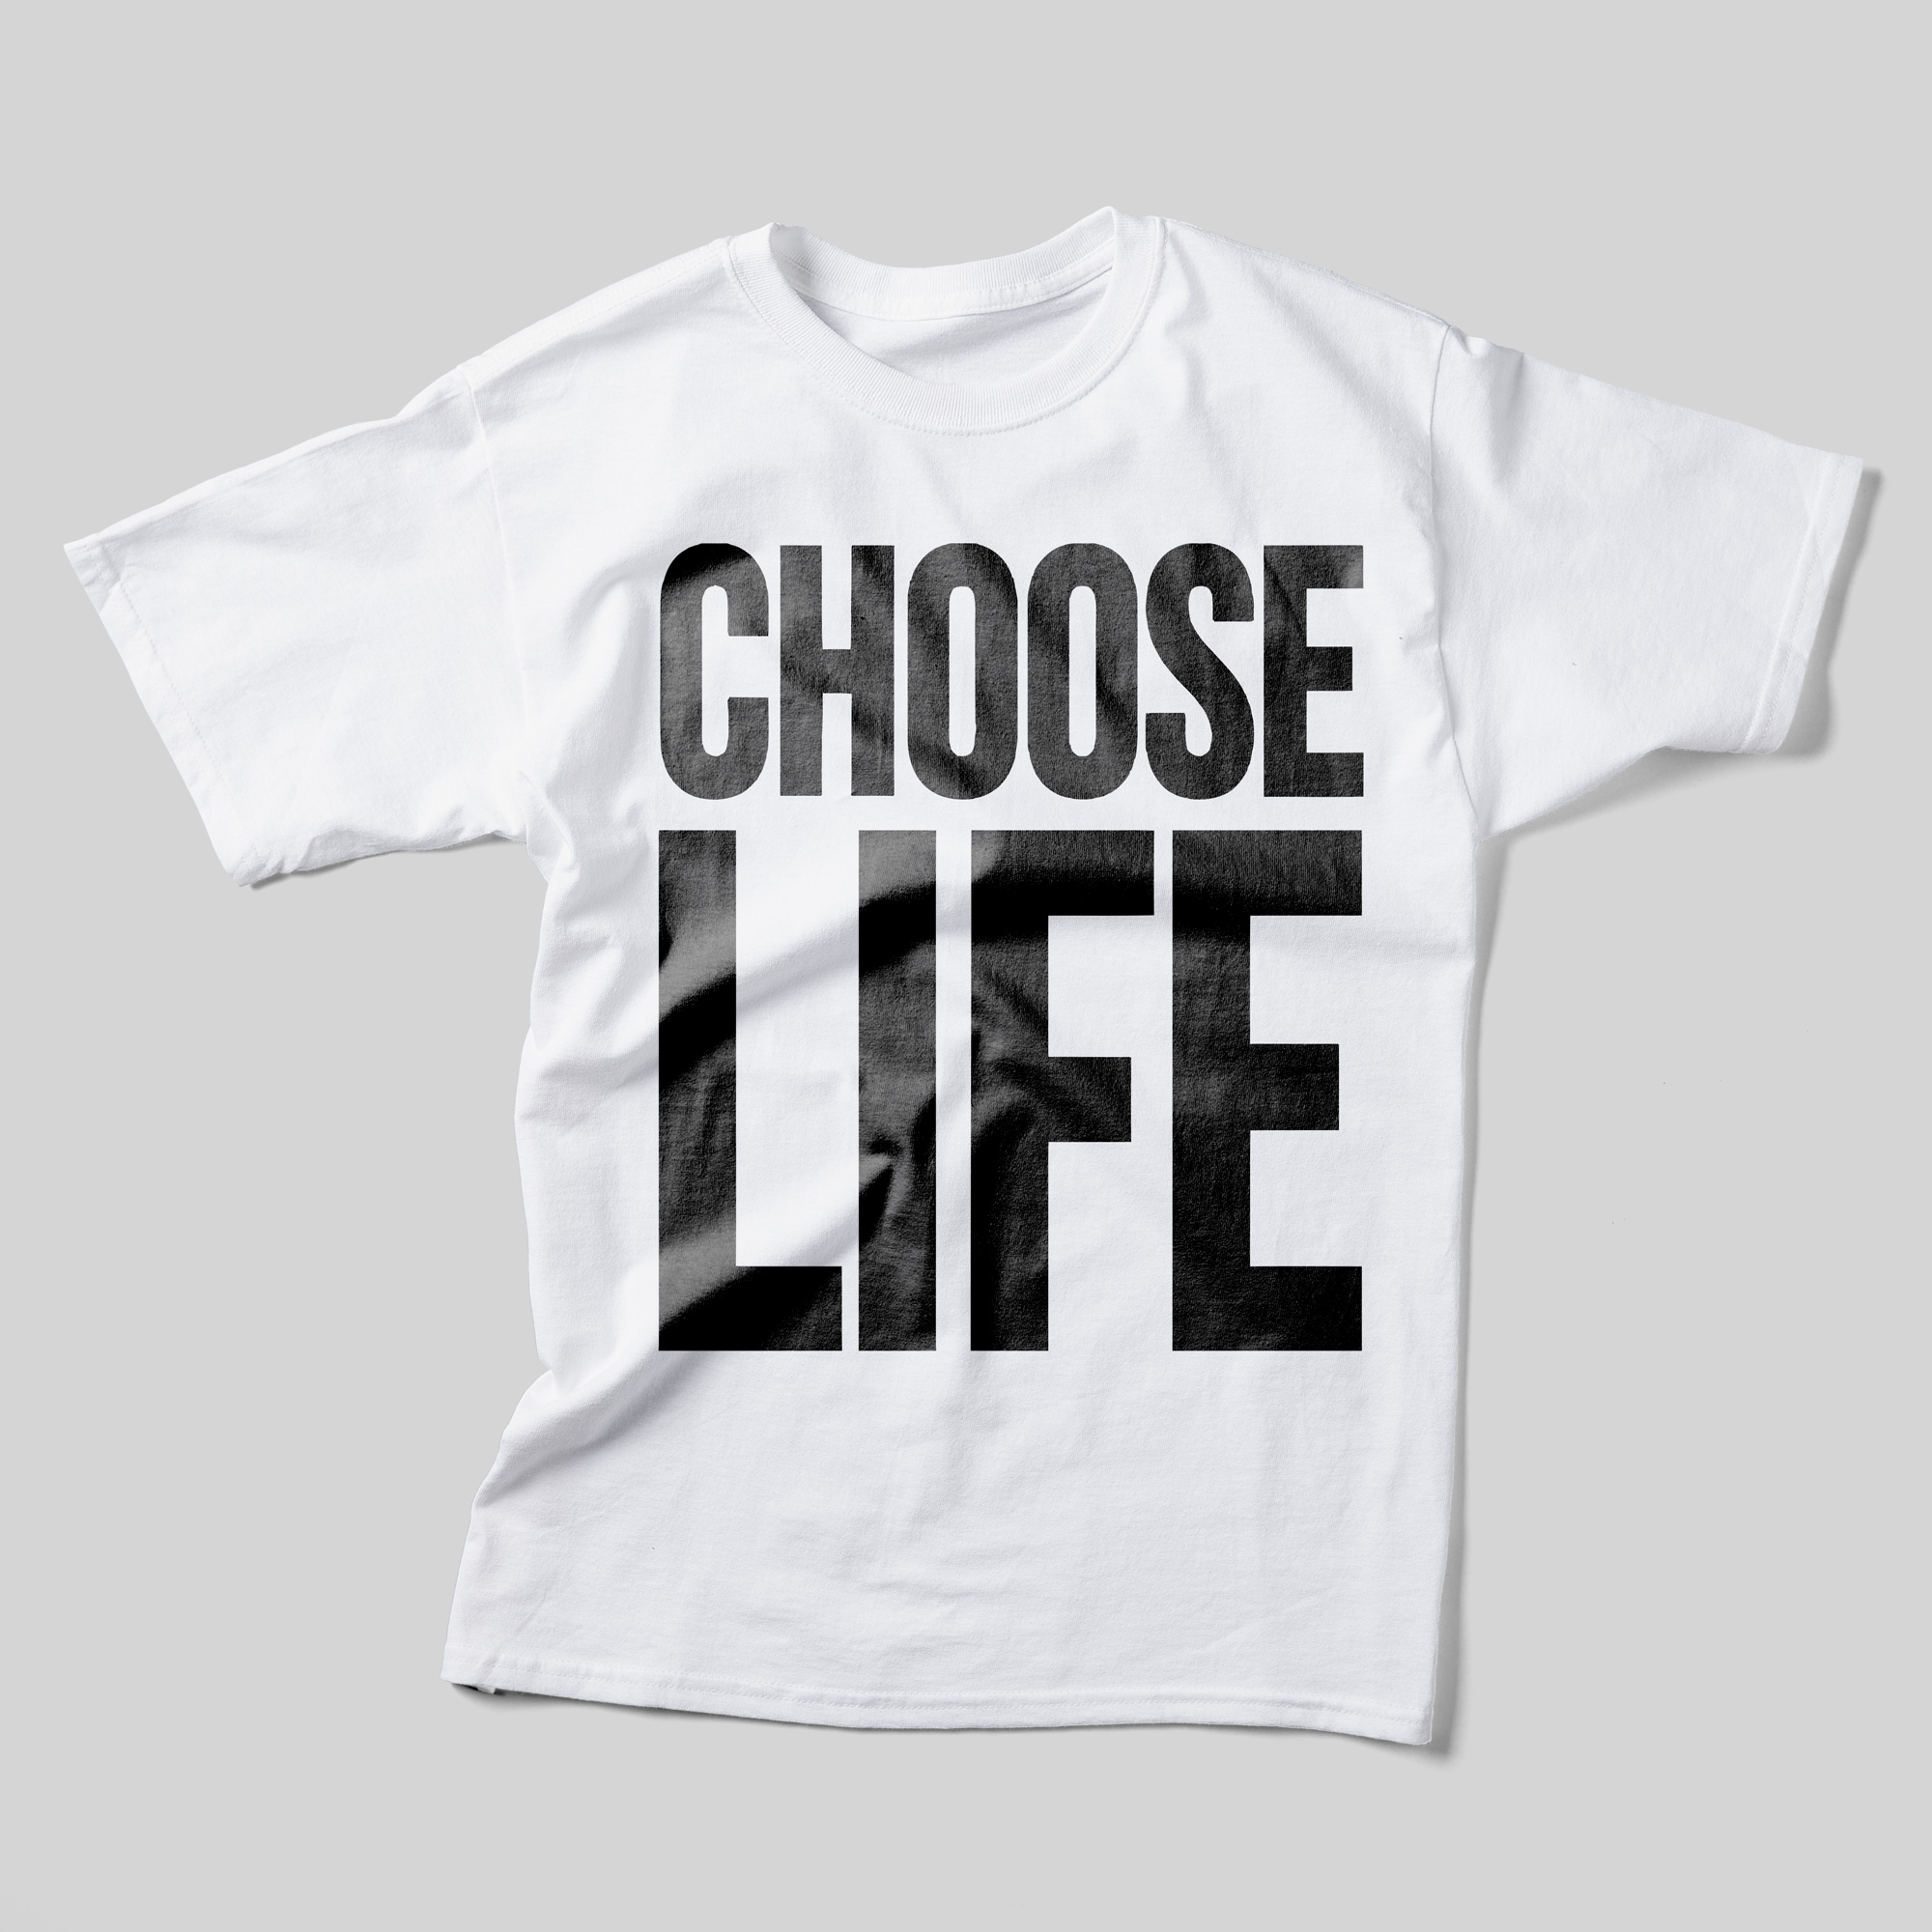 A white t-shirt that reads "Choose Life" in large black text.